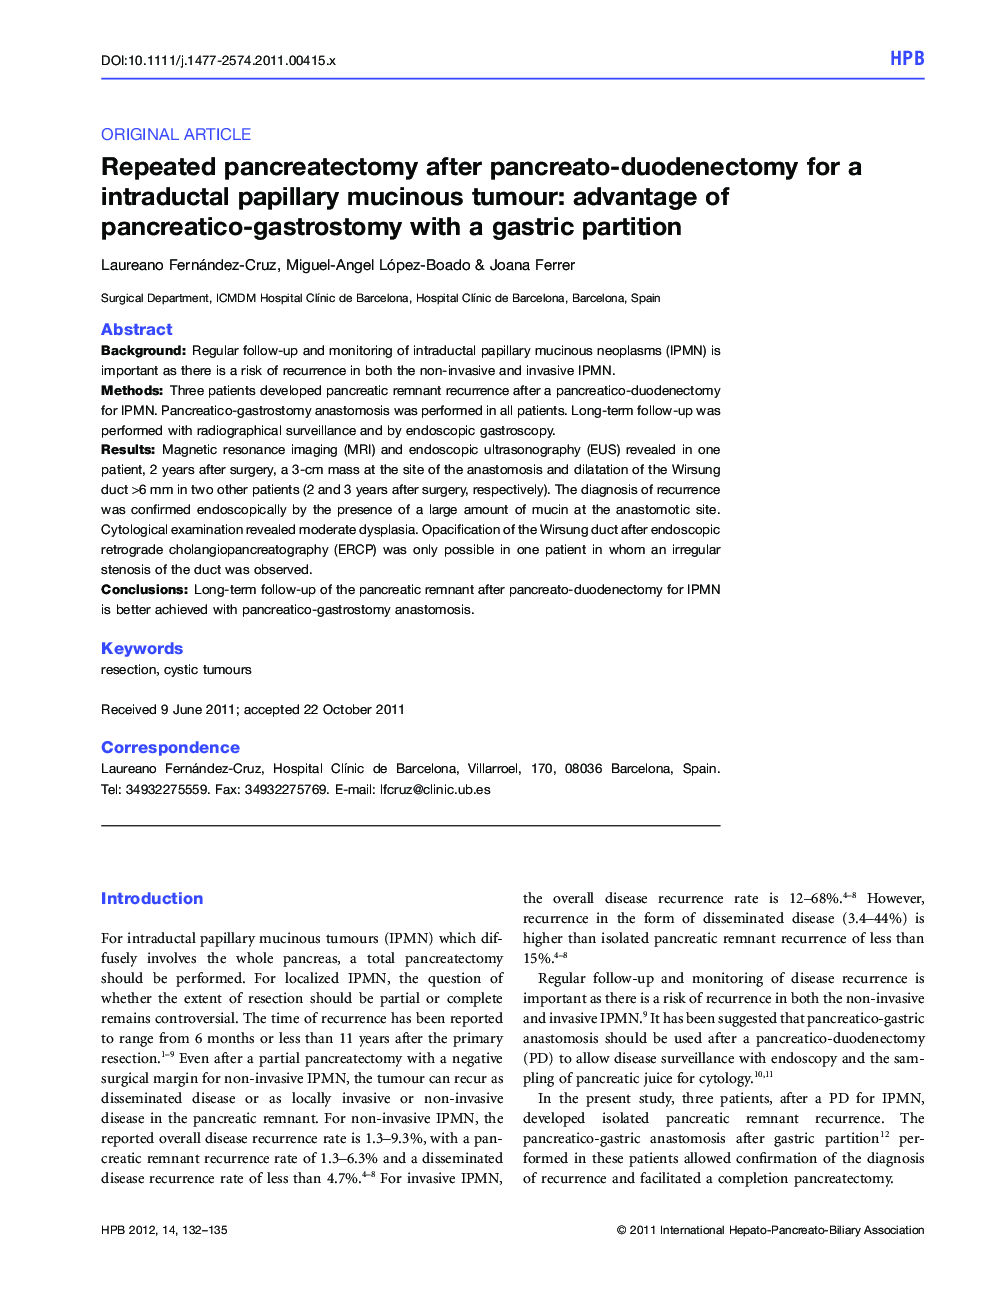 Repeated pancreatectomy after pancreato-duodenectomy for a intraductal papillary mucinous tumour: advantage of pancreatico-gastrostomy with a gastric partition